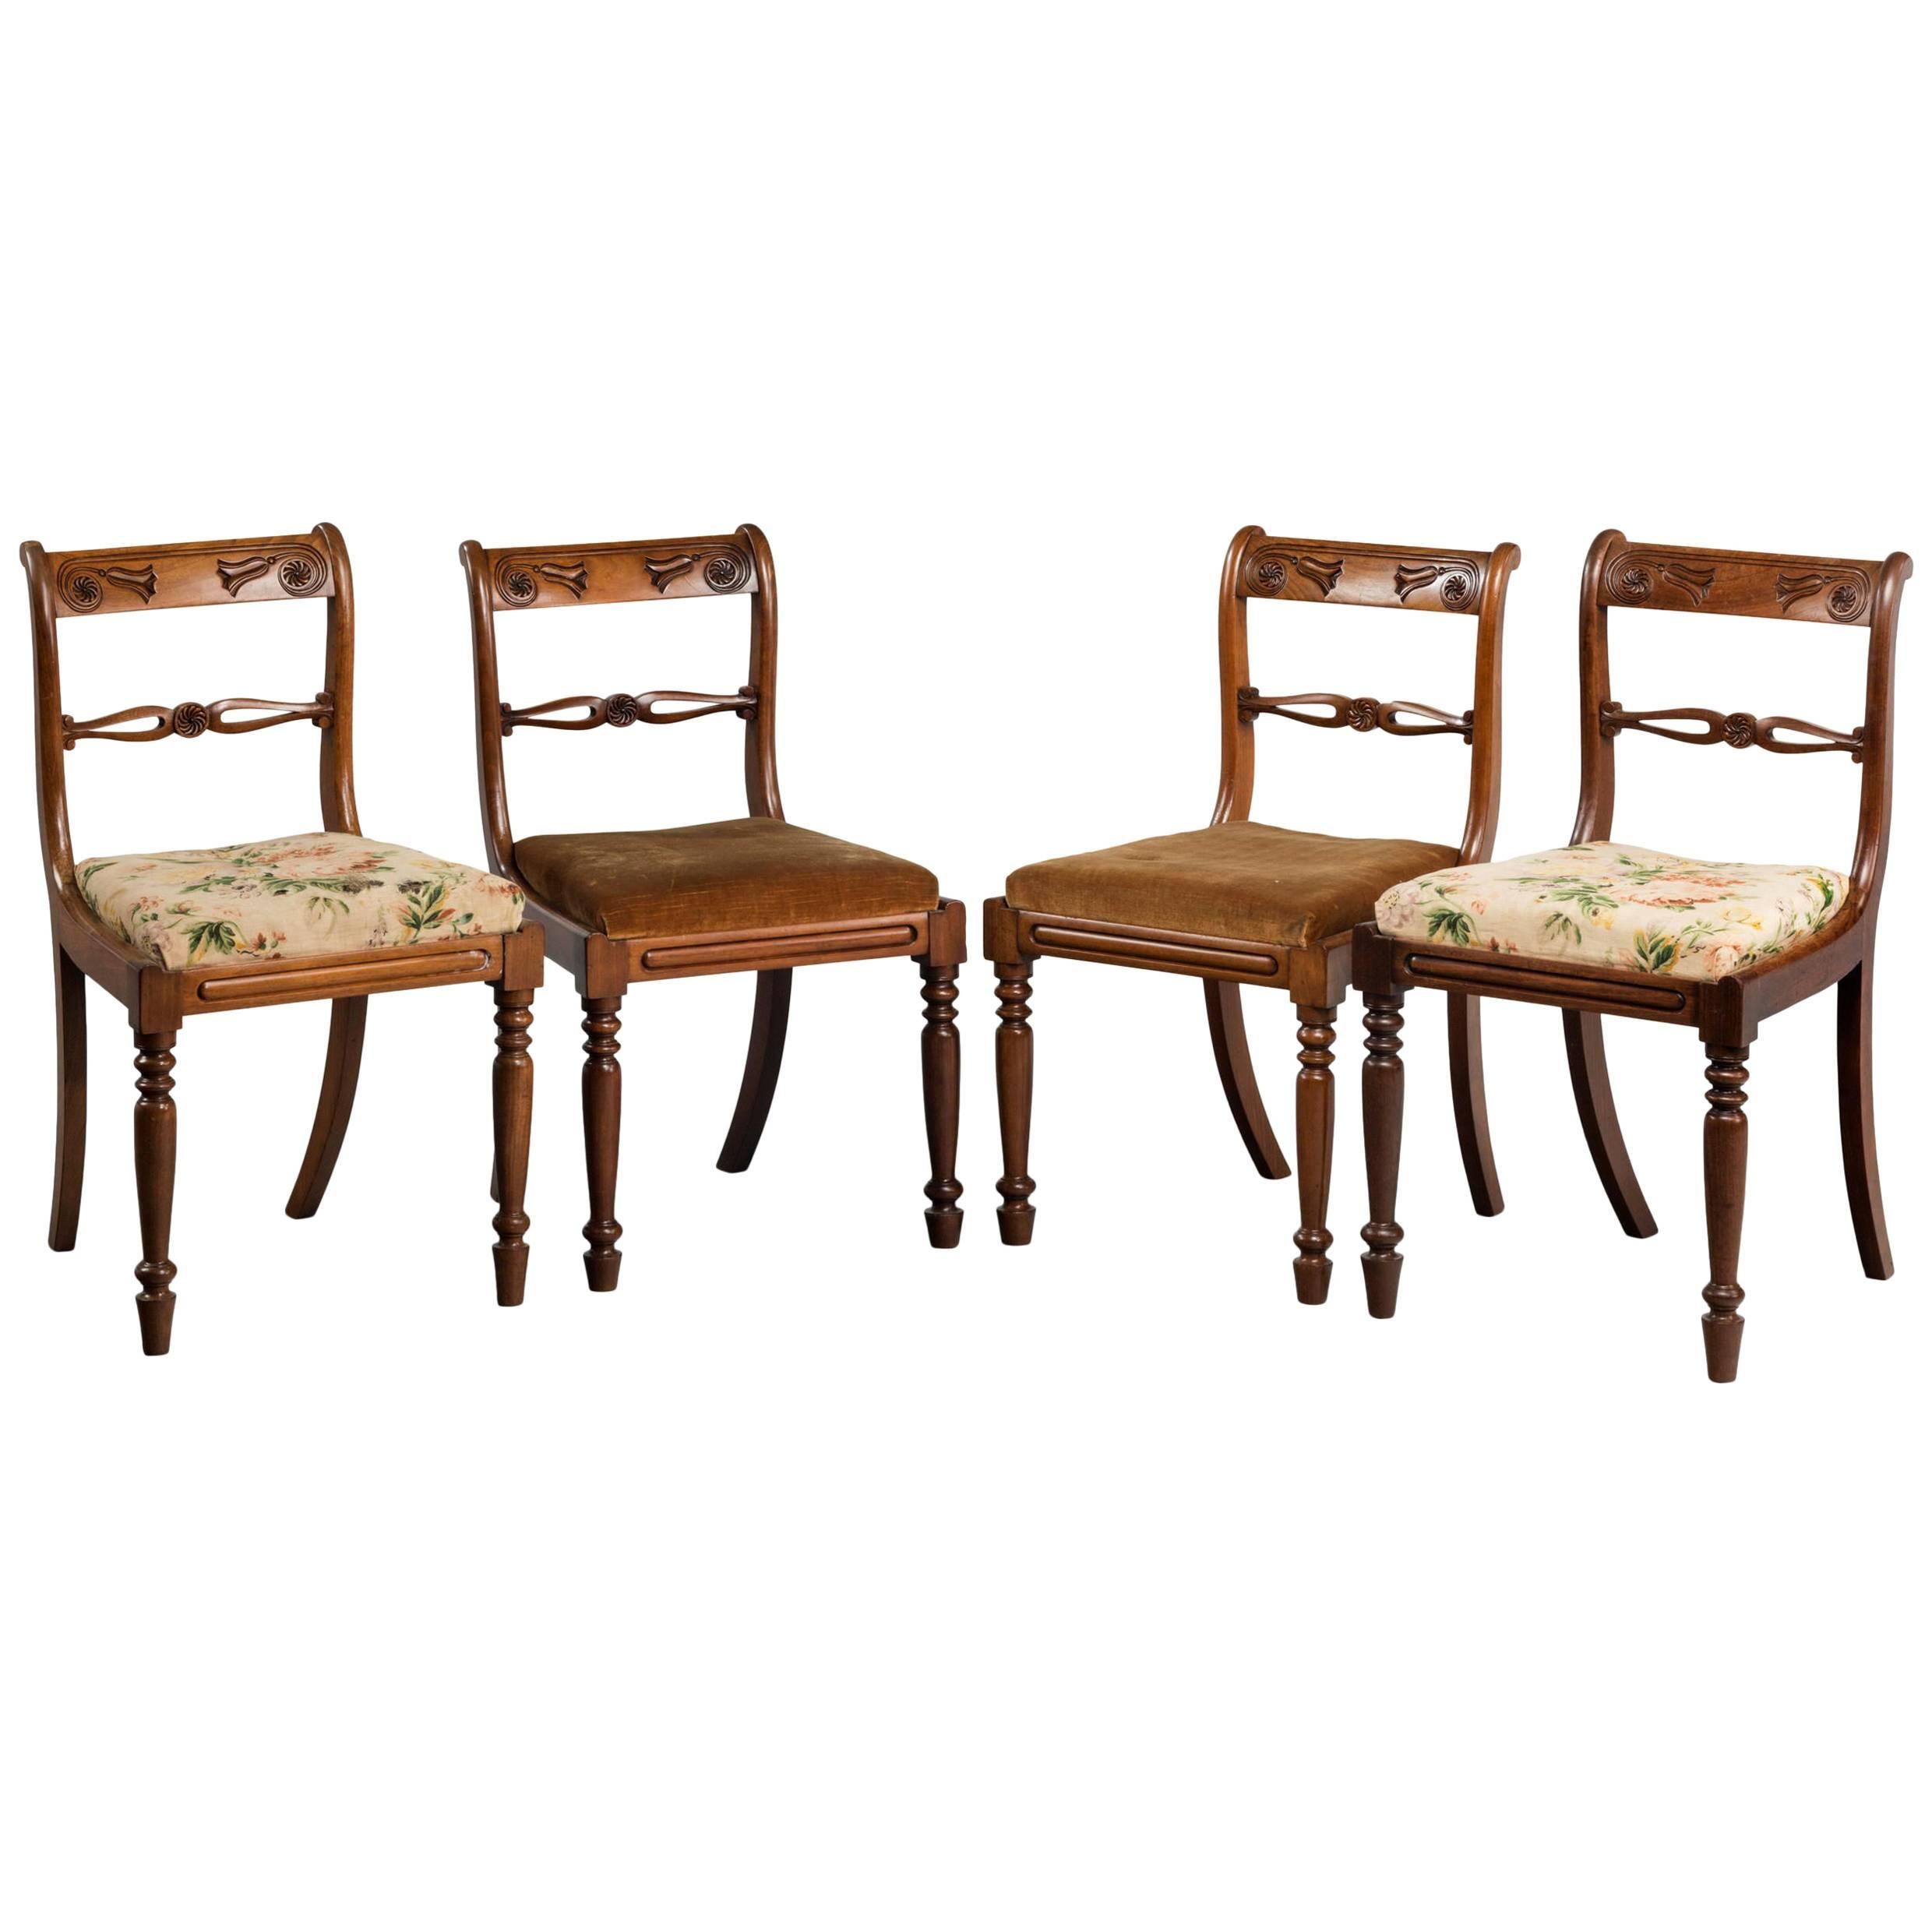 Set of Four Late Regency Period Mahogany Chairs